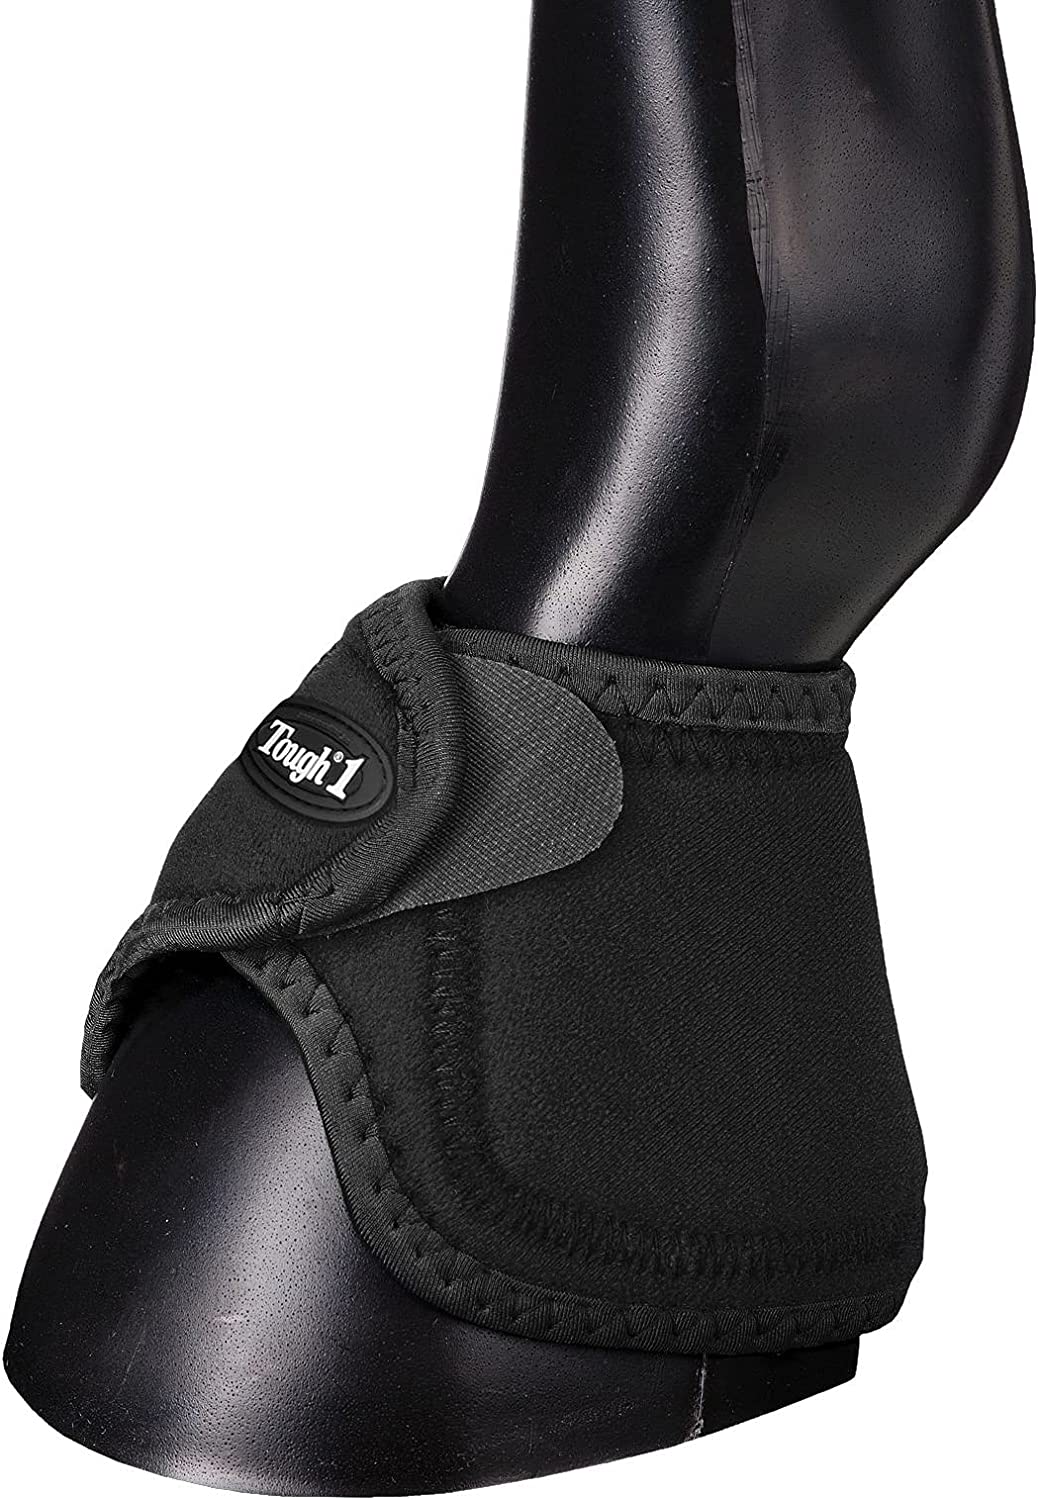 best bell boots for horses from tough1